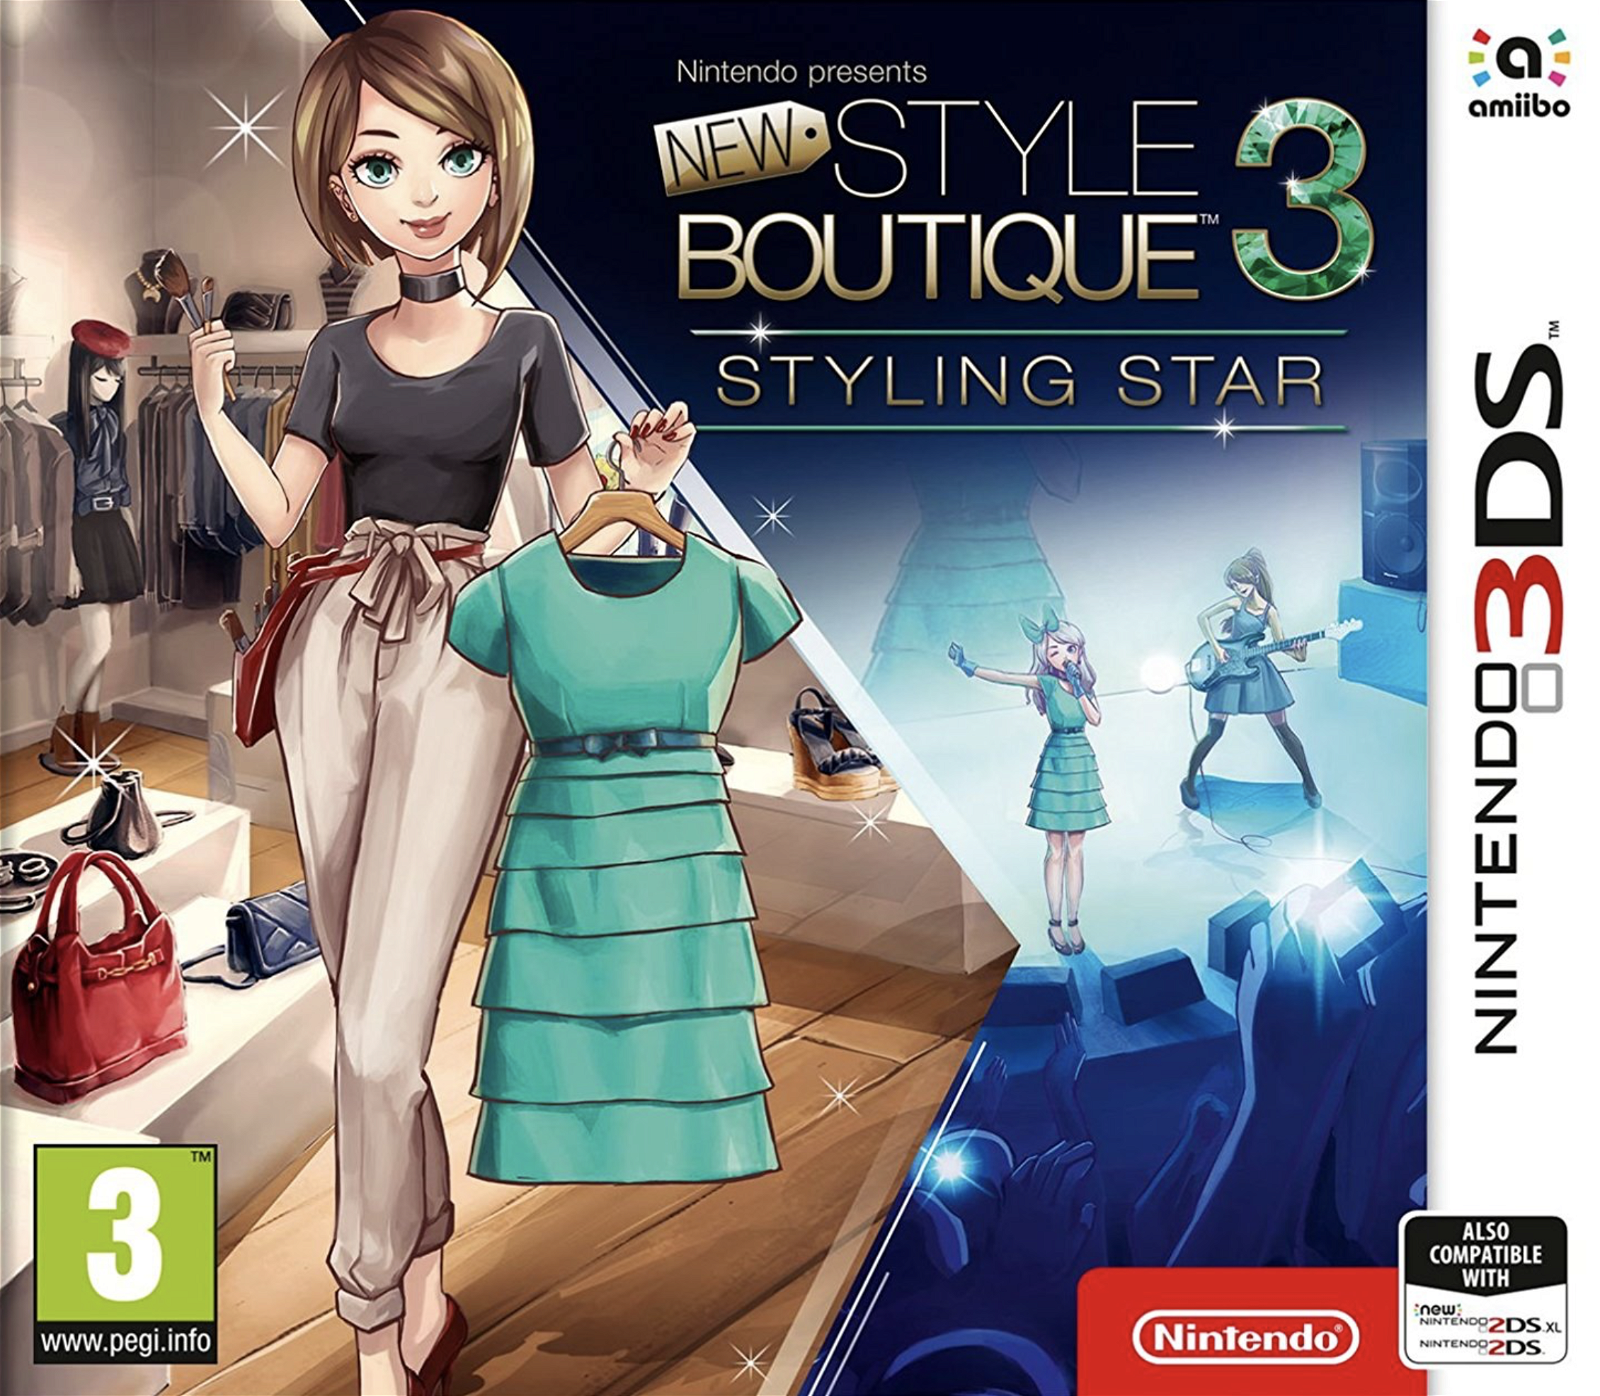 Image of Nintendo Presents: New Style Boutique 3 - Styling Star